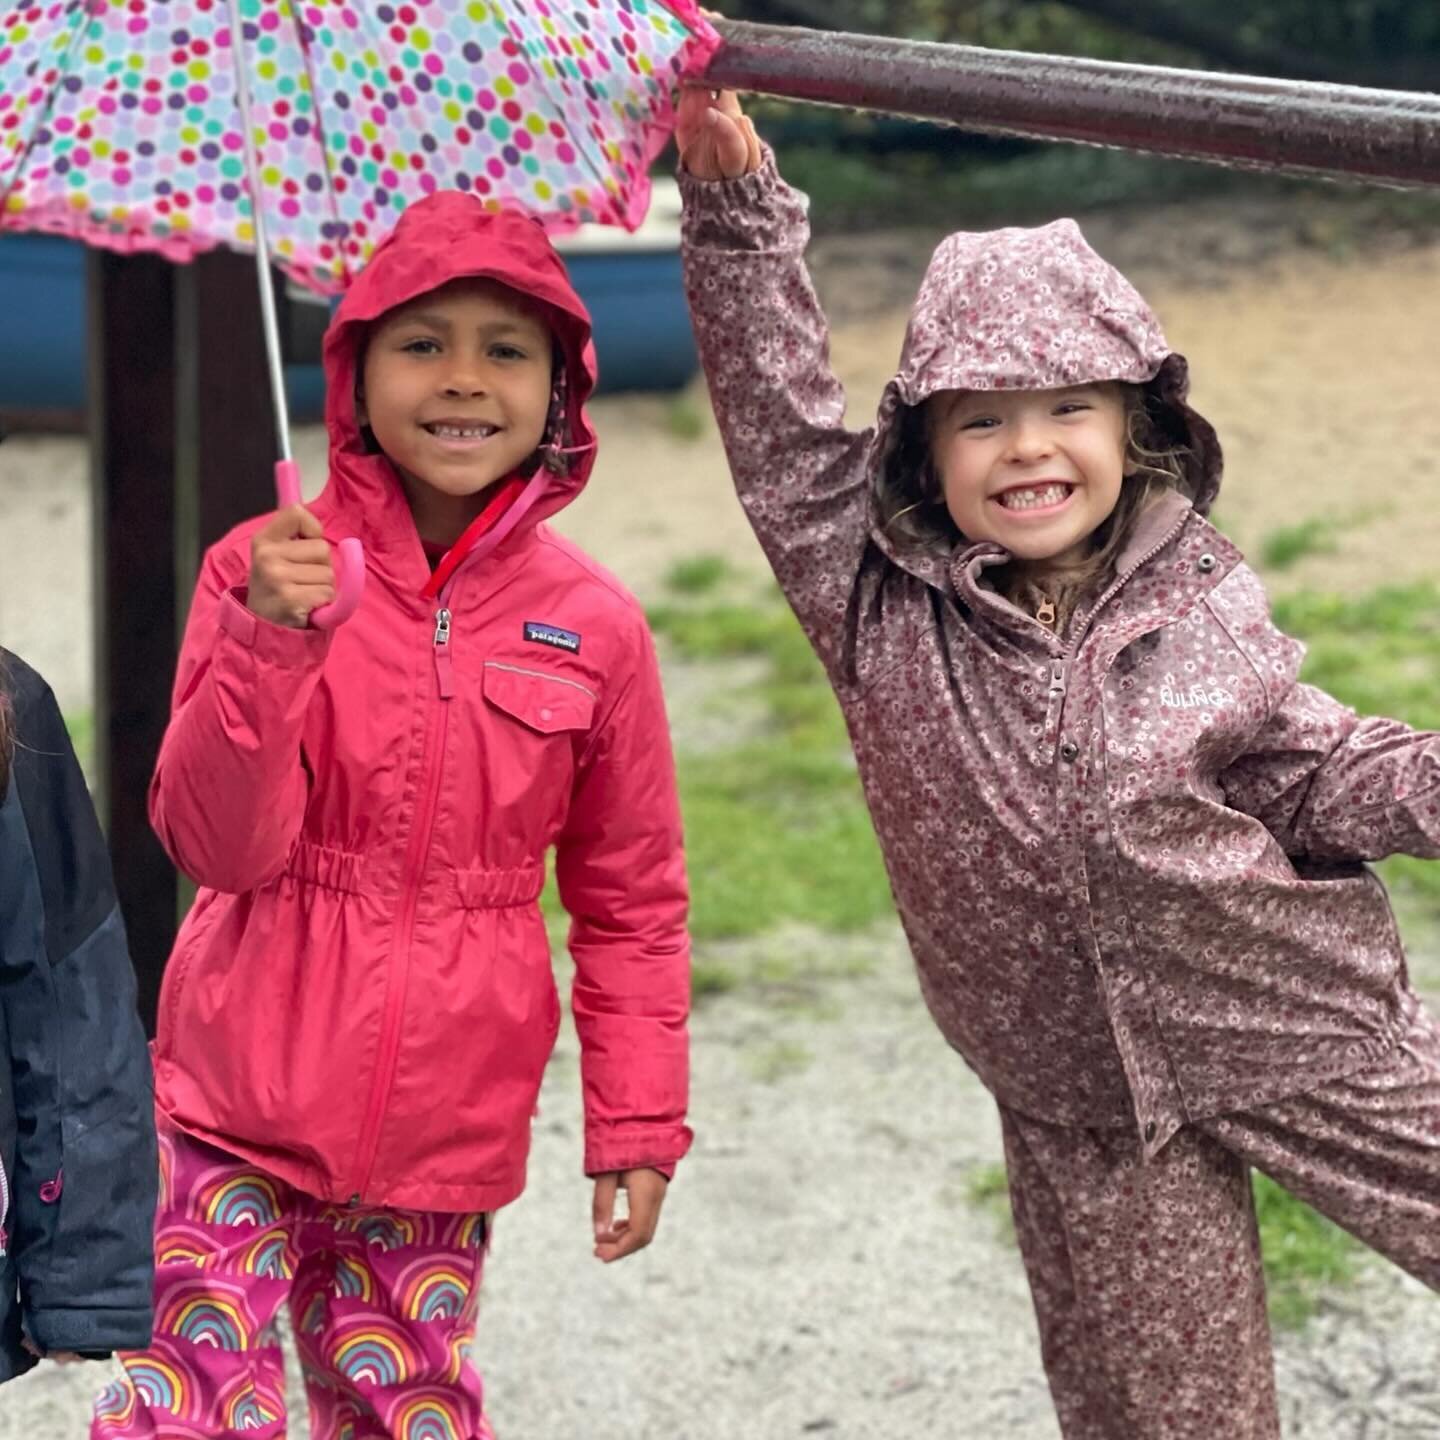 Scenes from this wet, wet week. We had fun despite the downpours. Butter the cat walked all the way to the redwood grove with the second graders. In kindergarten the topic was appropriately the watercycle and rainbows. We lost power but had school an